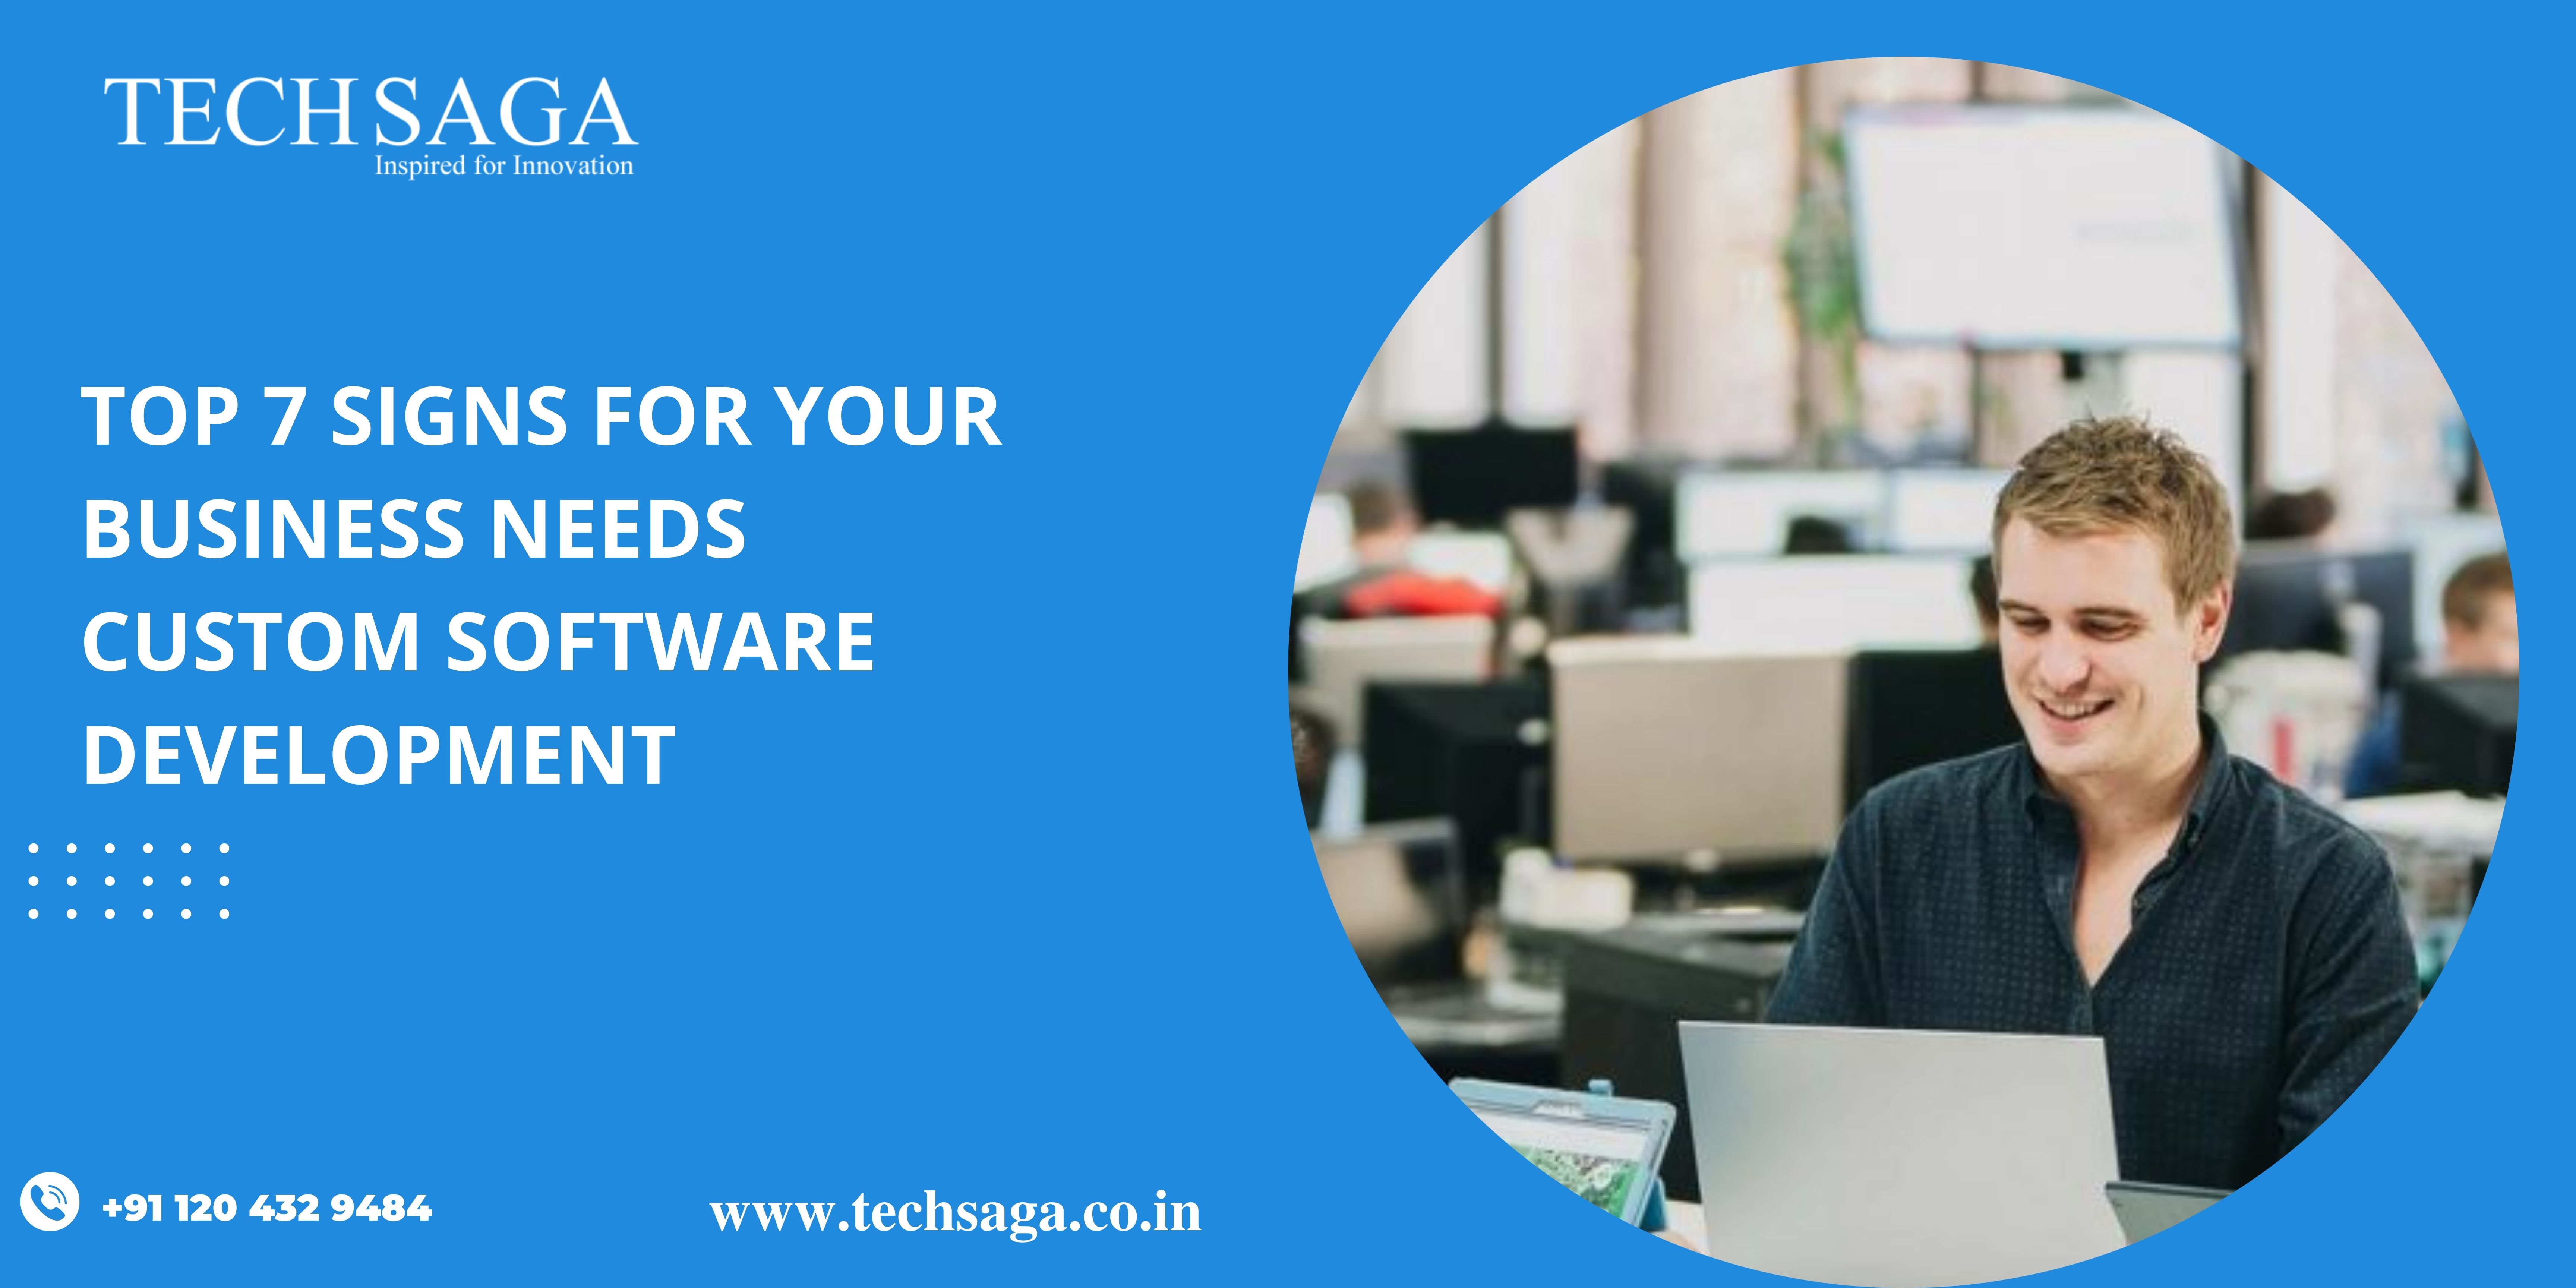 Top 7 Signs For Your Business Needs Custom Software Development.jpg  by techsaga